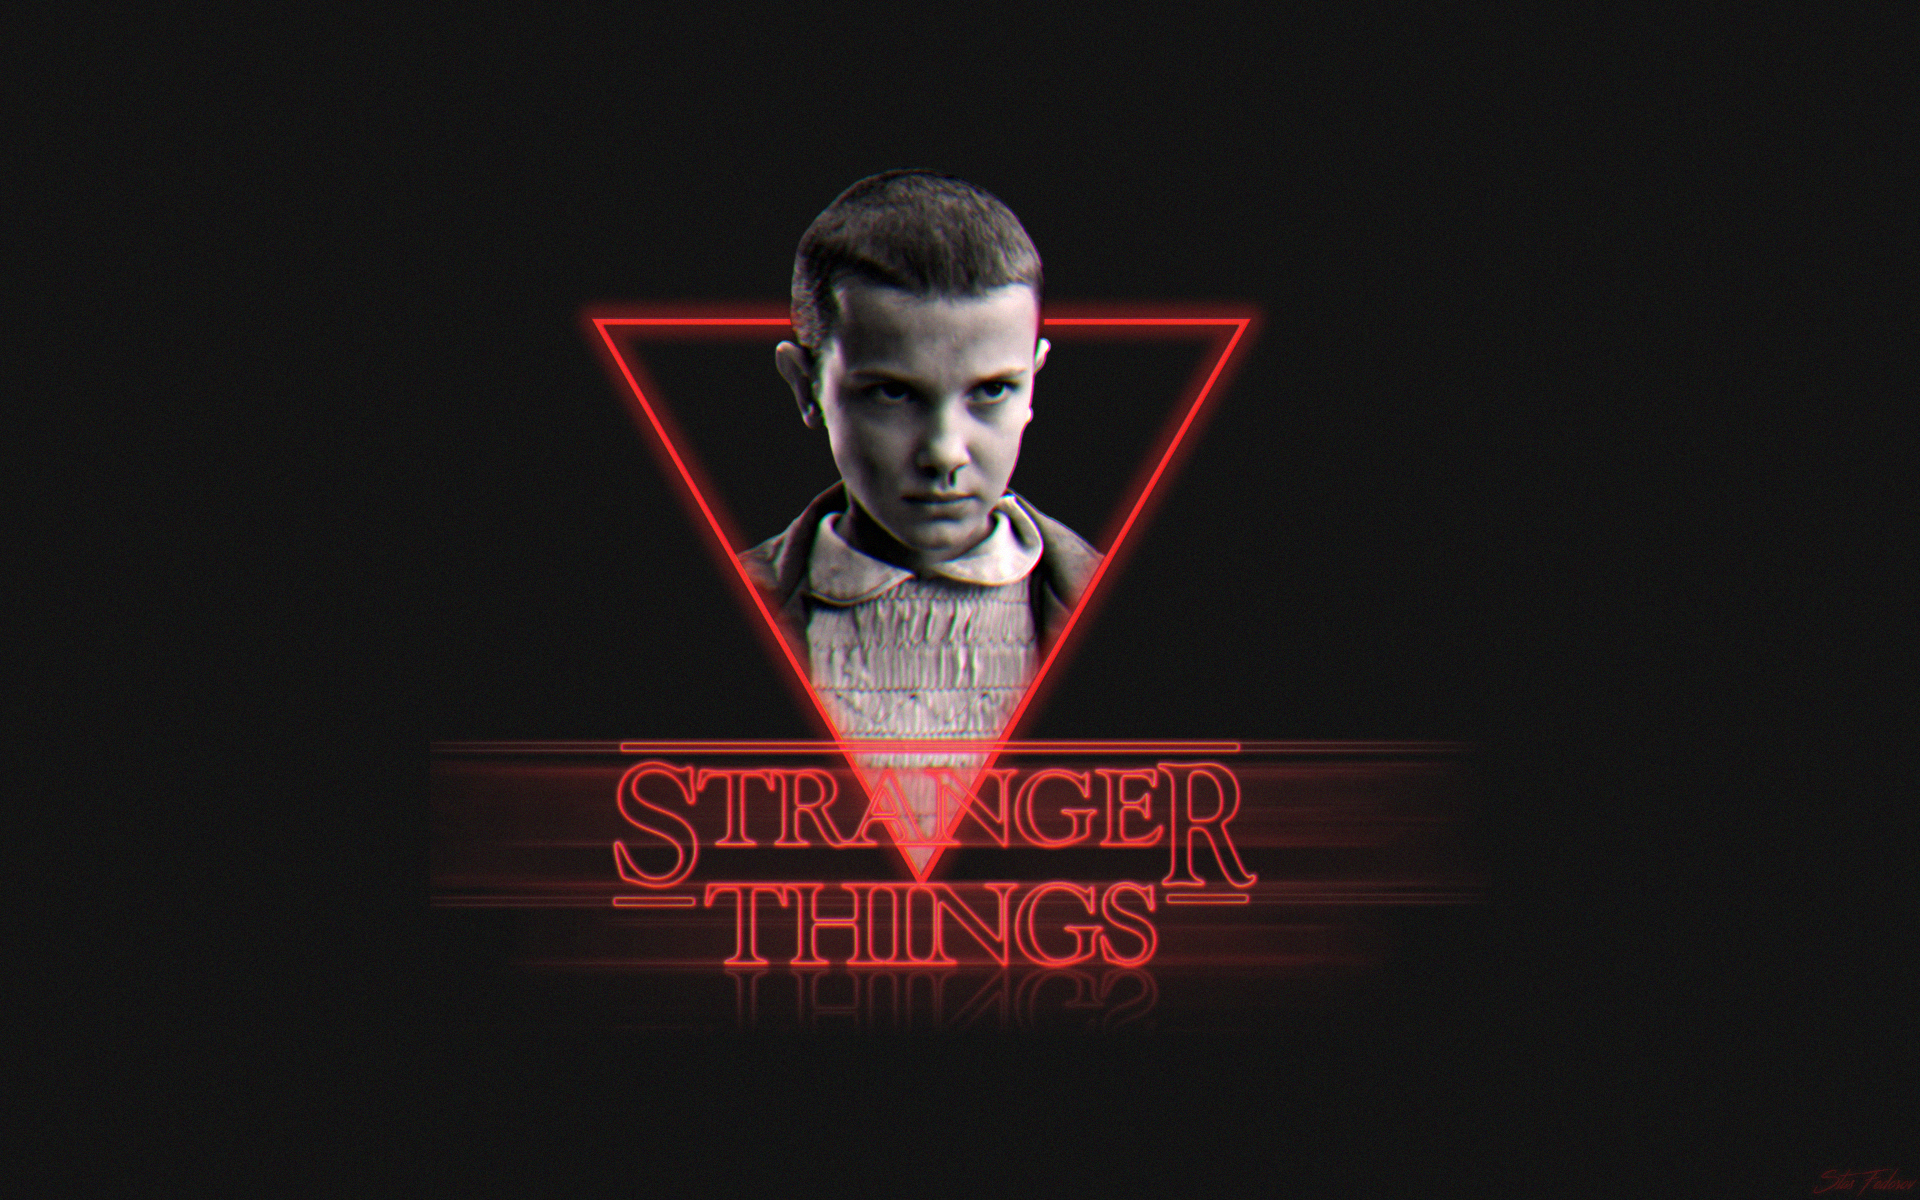 General 1920x1200 Stranger Things neon 1980s typography photoshopped digital art Eleven Millie Bobby Brown black background TV series nosebleed anaglyph 3D